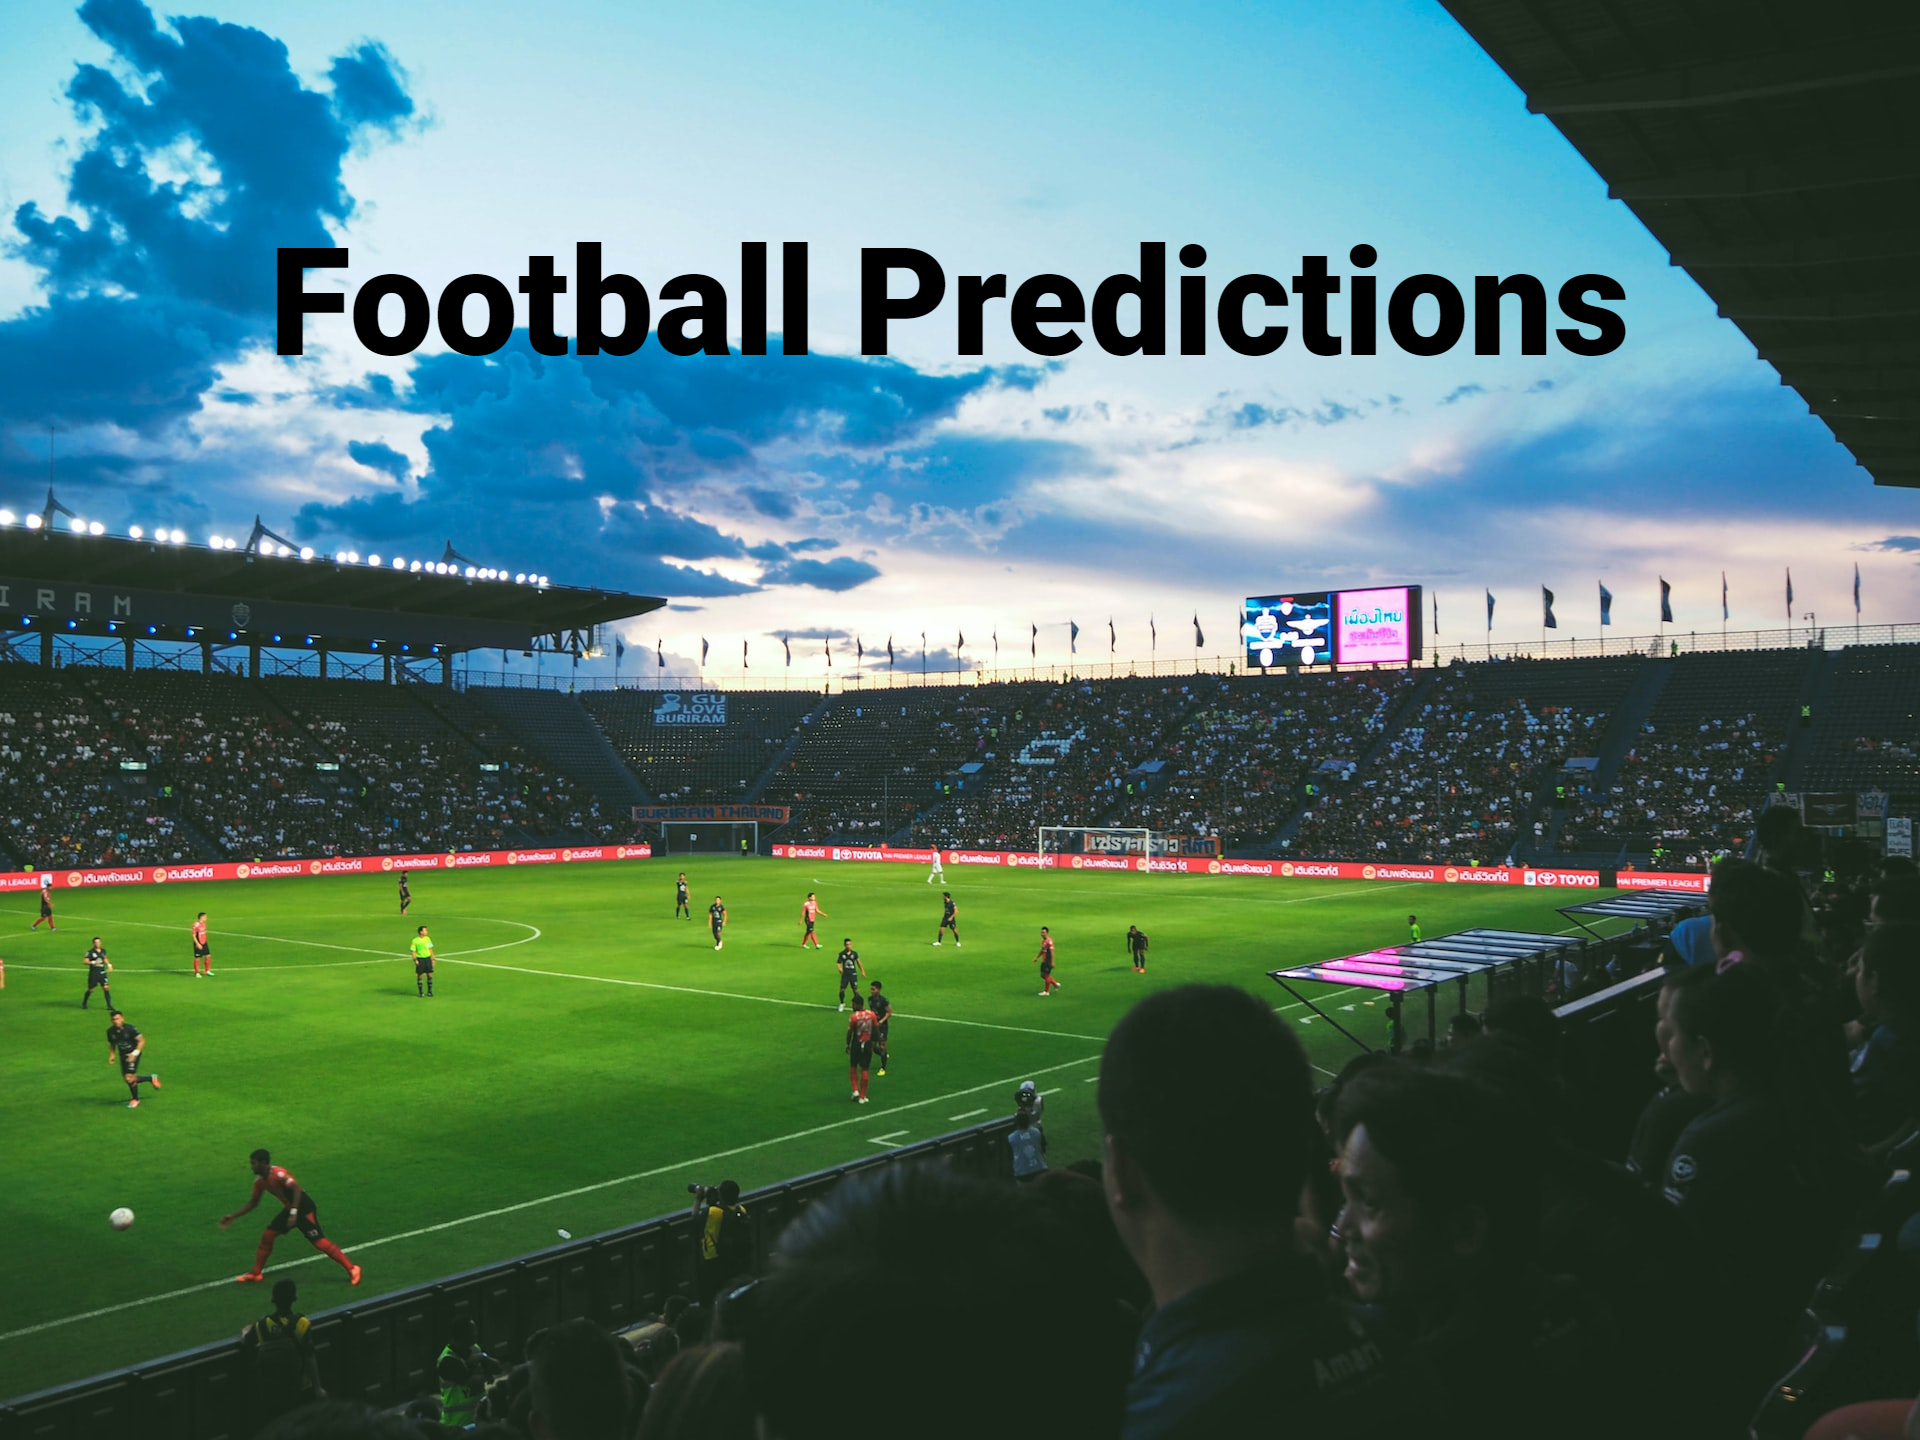 Football Predictions - How They Can Help You Win More Money